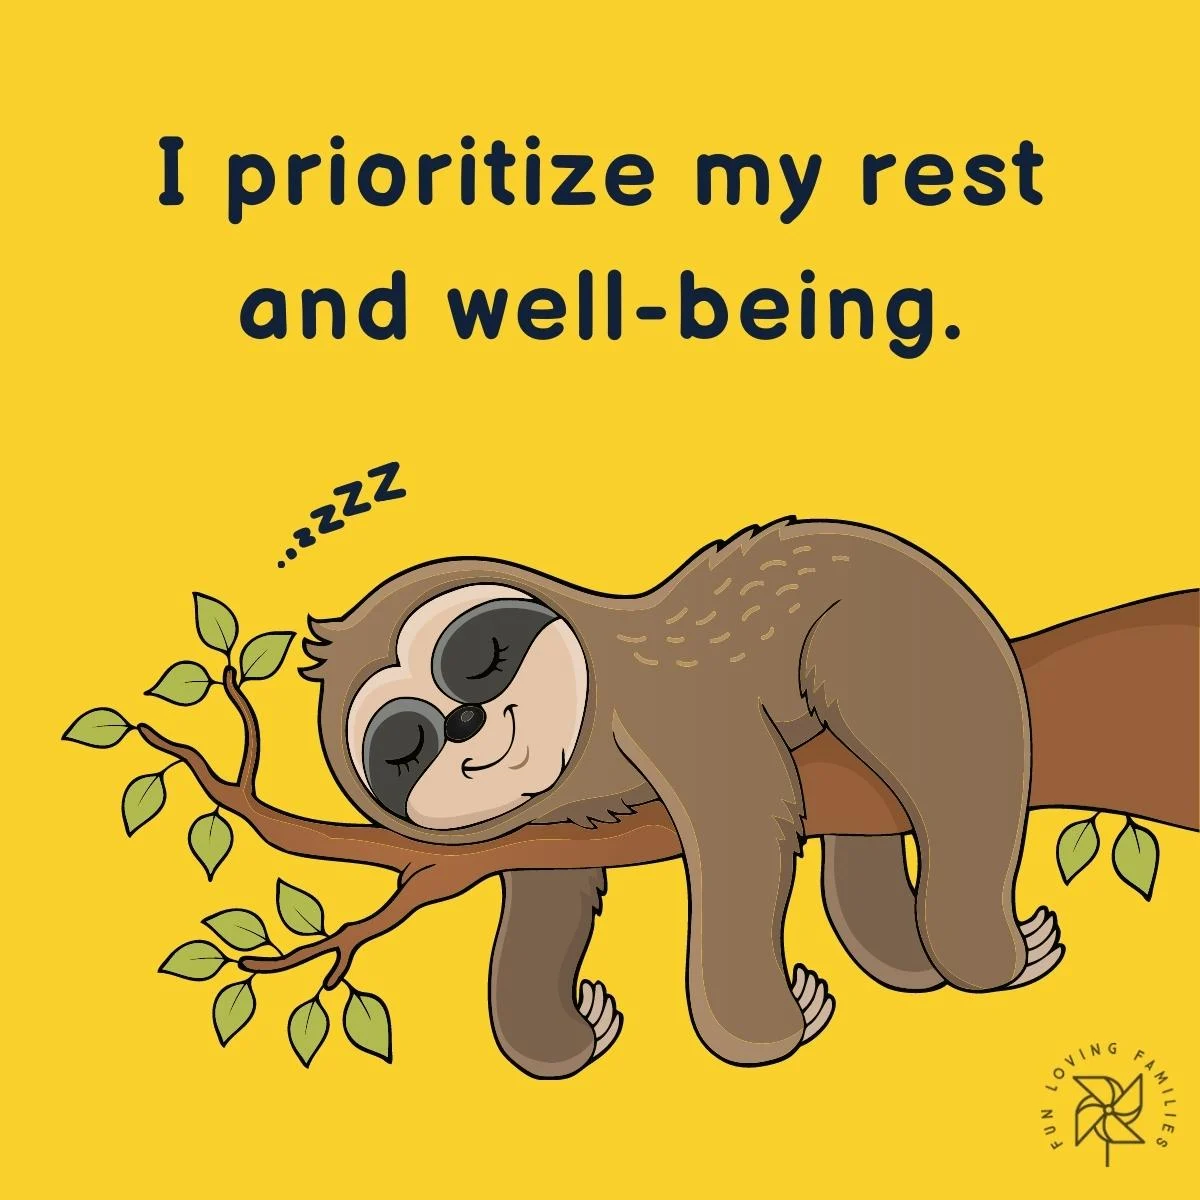 I prioritize my rest and well-being affirmation